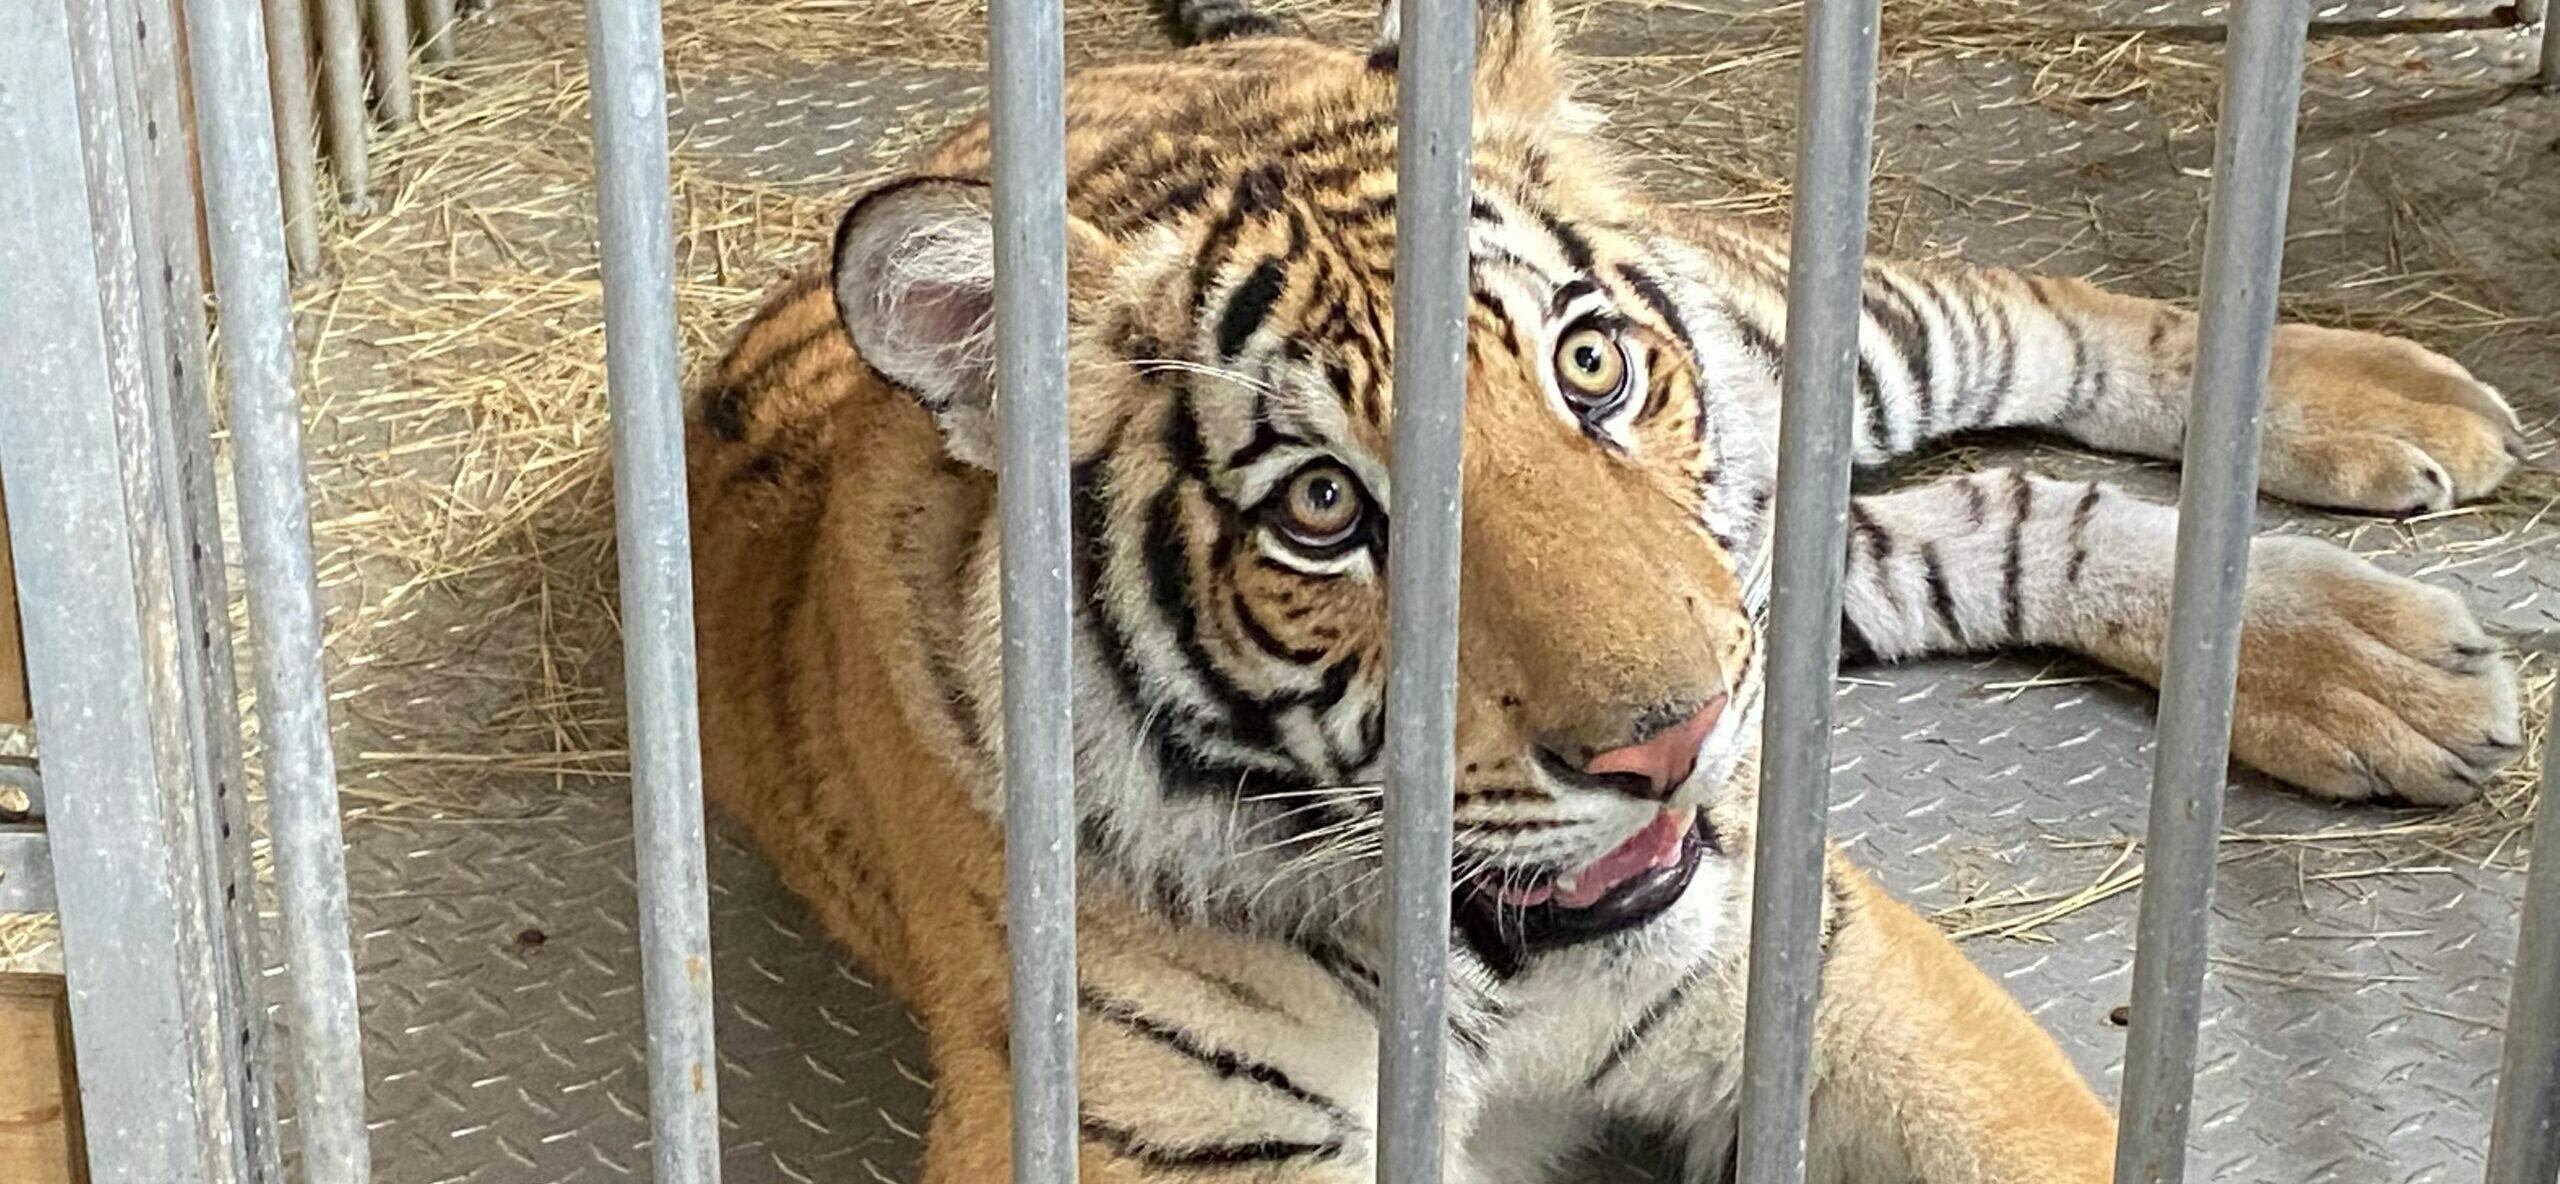 Employee Gets Tiger Killed After Reaching Into Enclosure After Hours